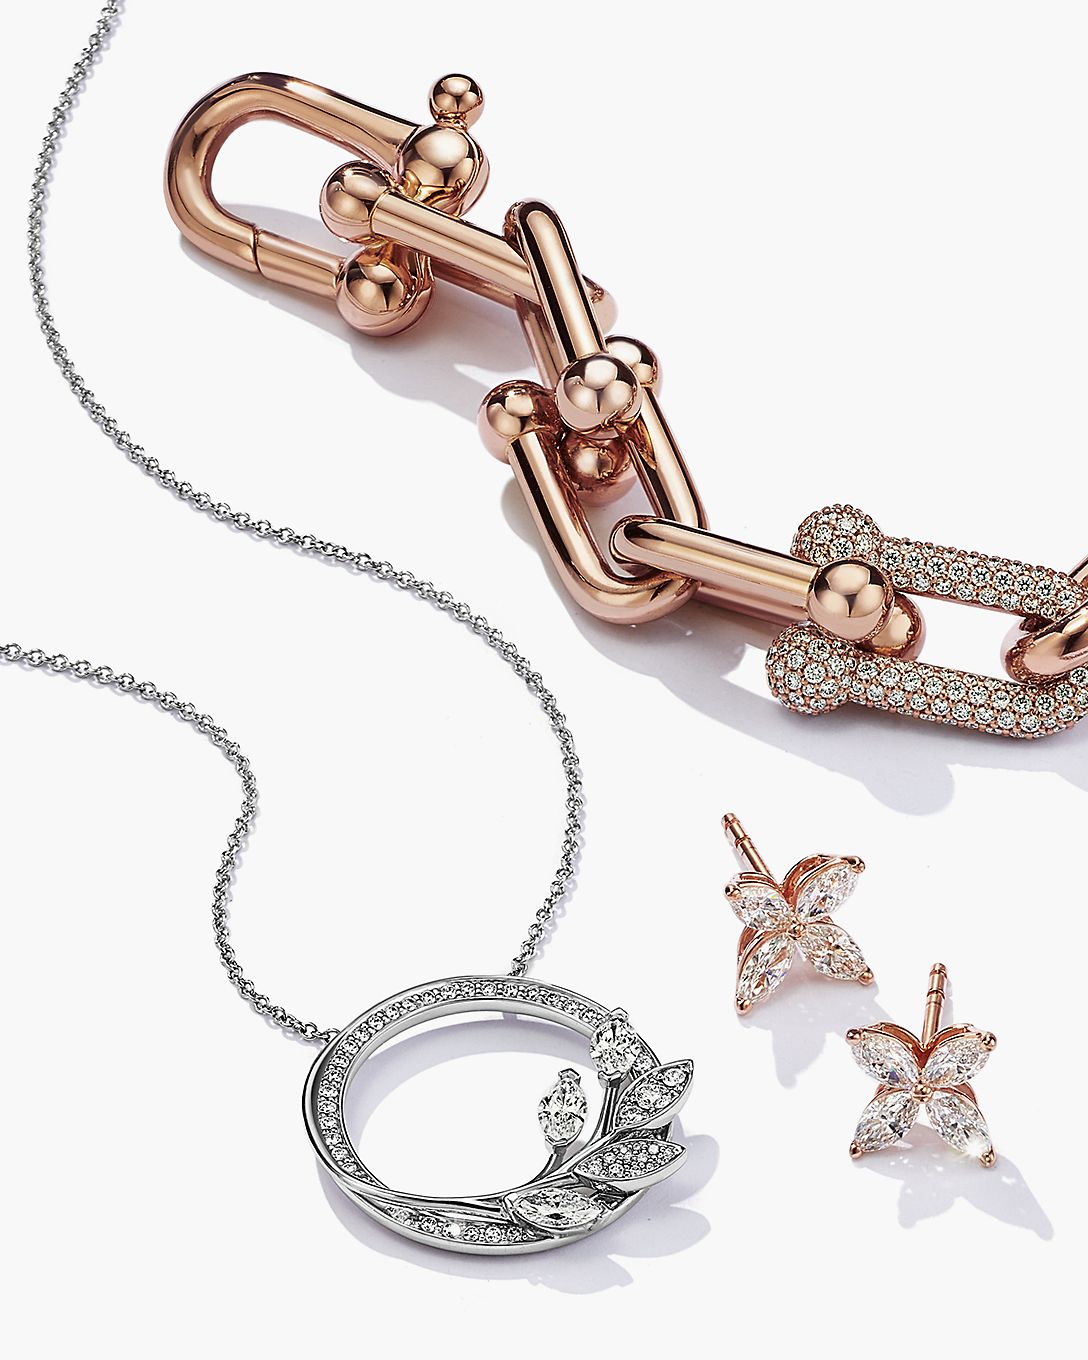 Browse Tiffany & Co. Gifts for Her